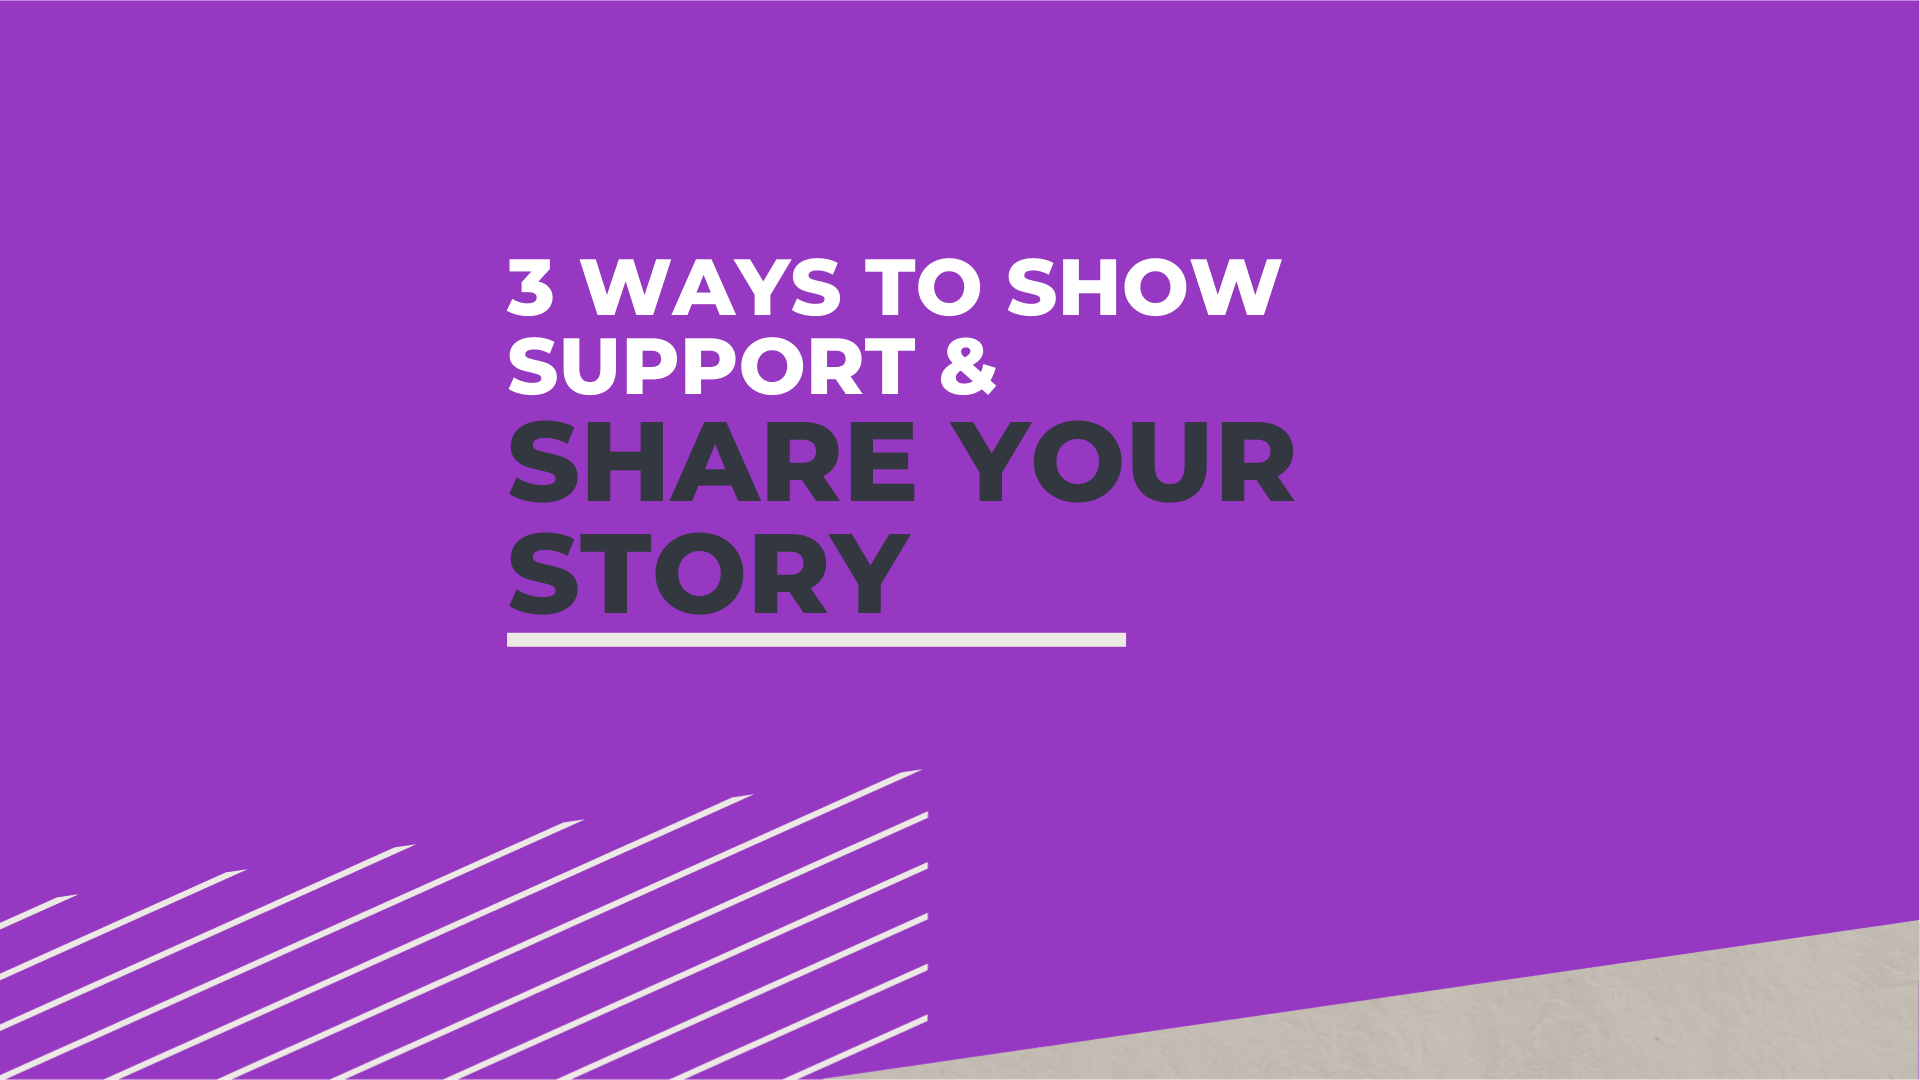 3 ways to share your story